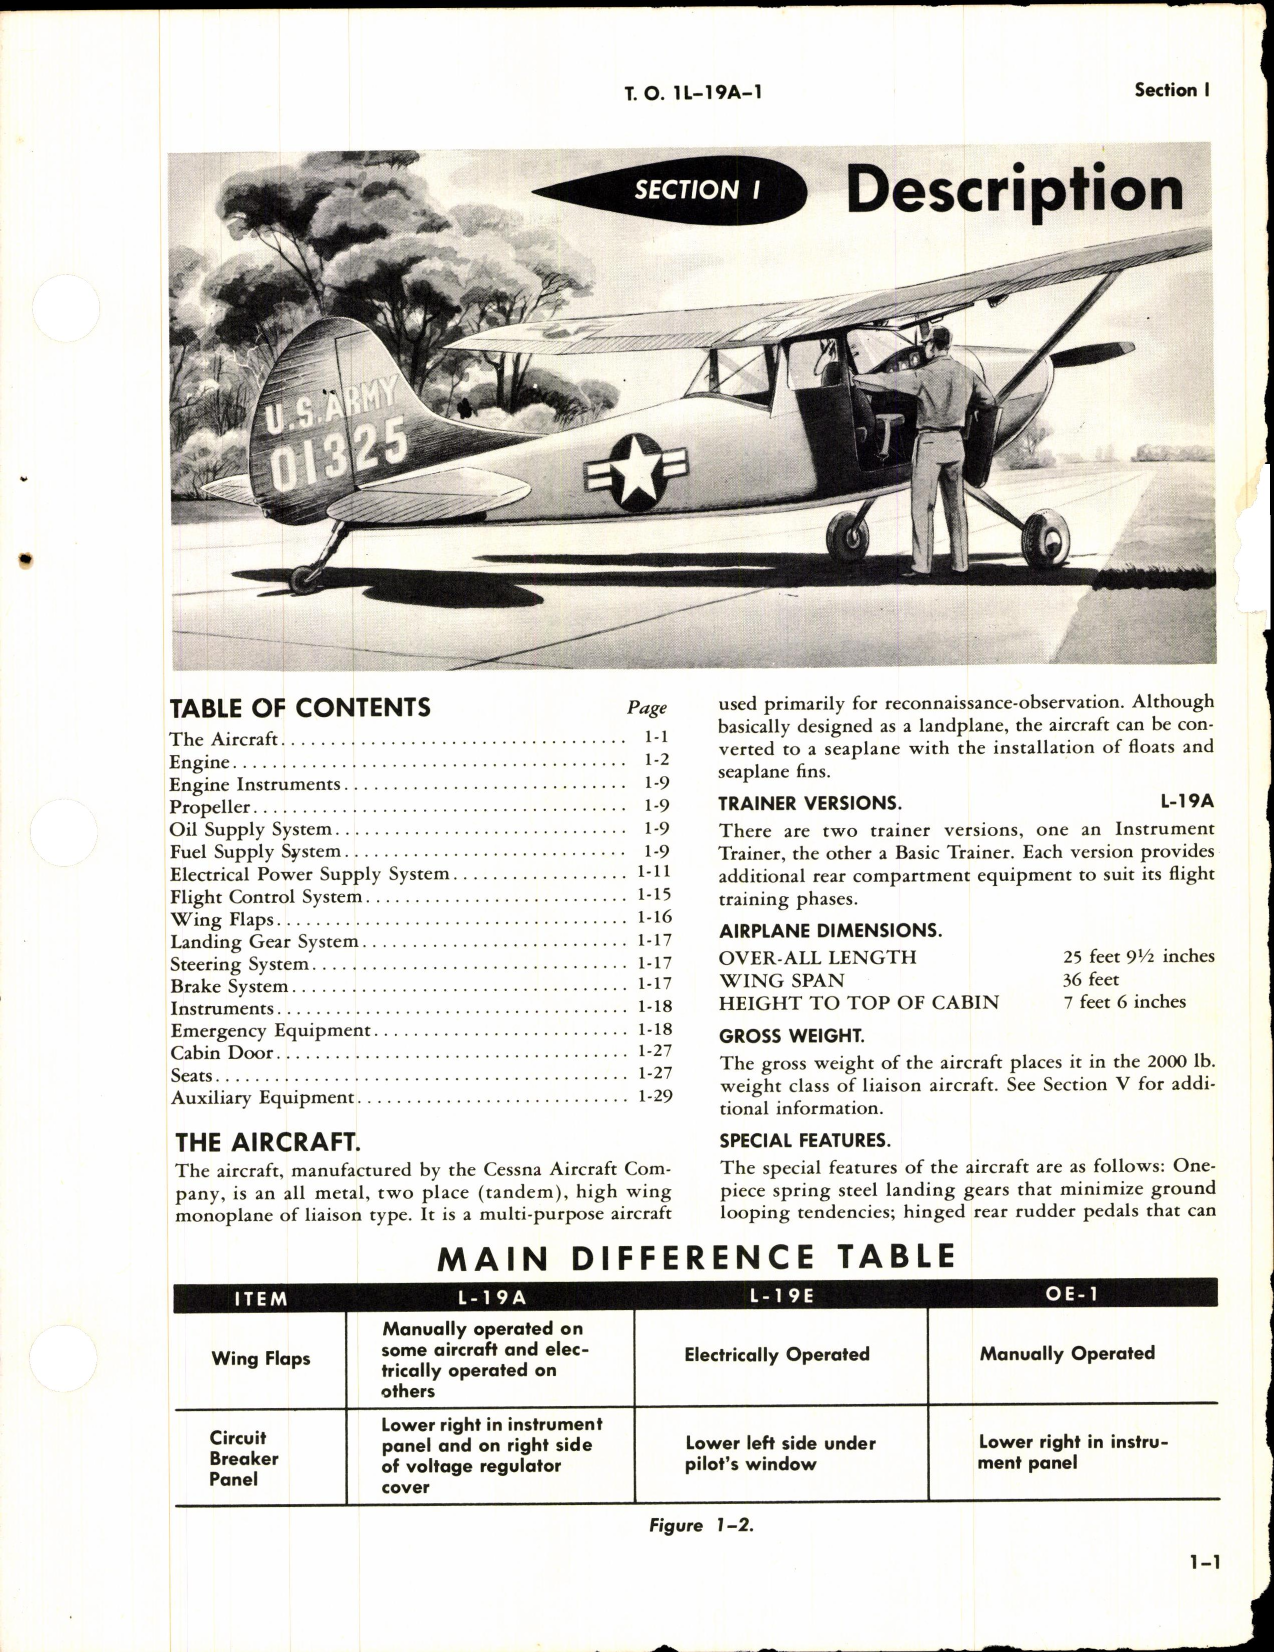 Sample page 7 from AirCorps Library document: Flight Handbook for L-19A, L-19E, and OE-1